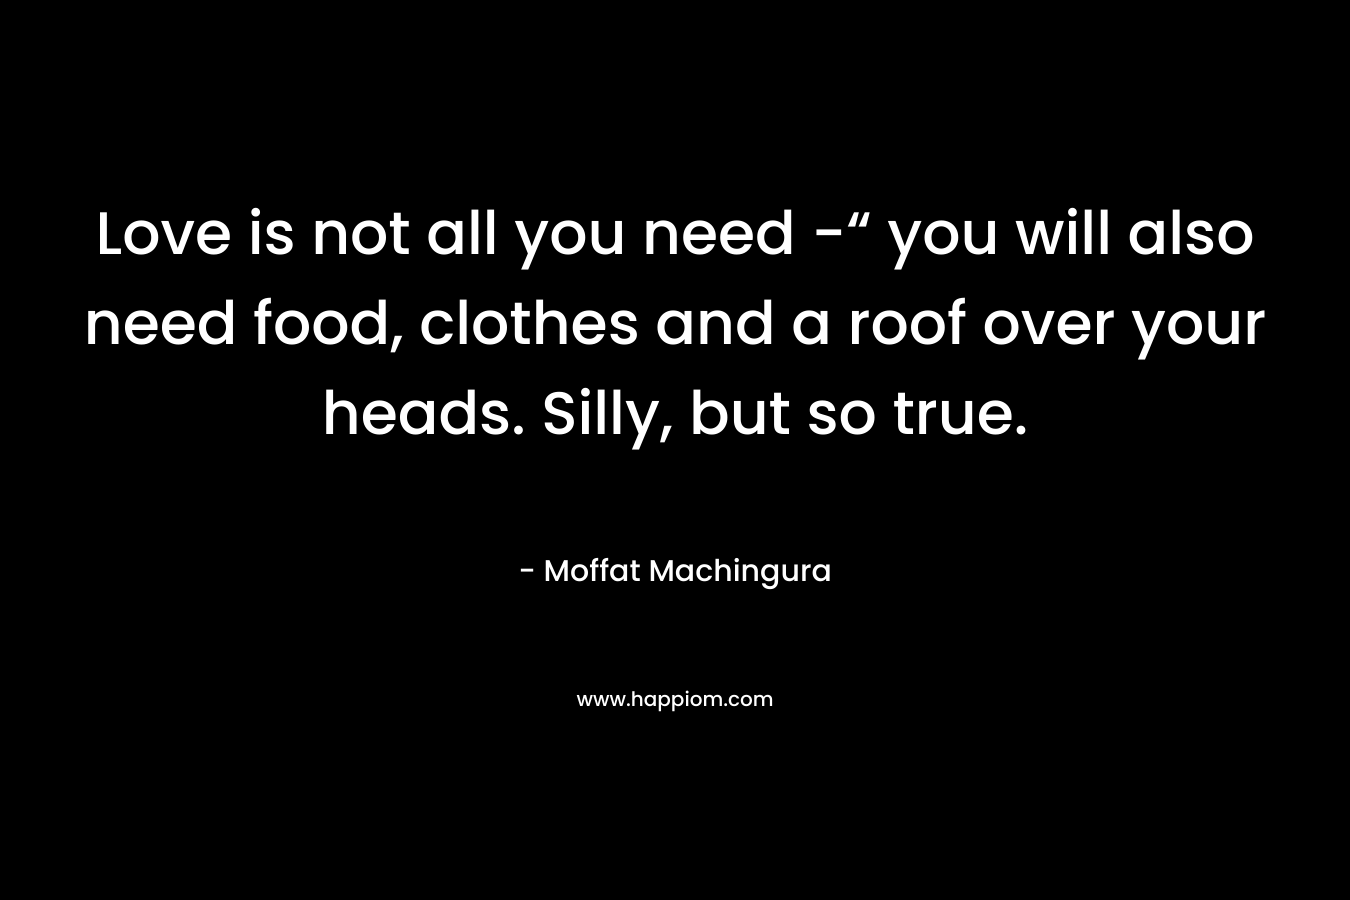 Love is not all you need -“ you will also need food, clothes and a roof over your heads. Silly, but so true.